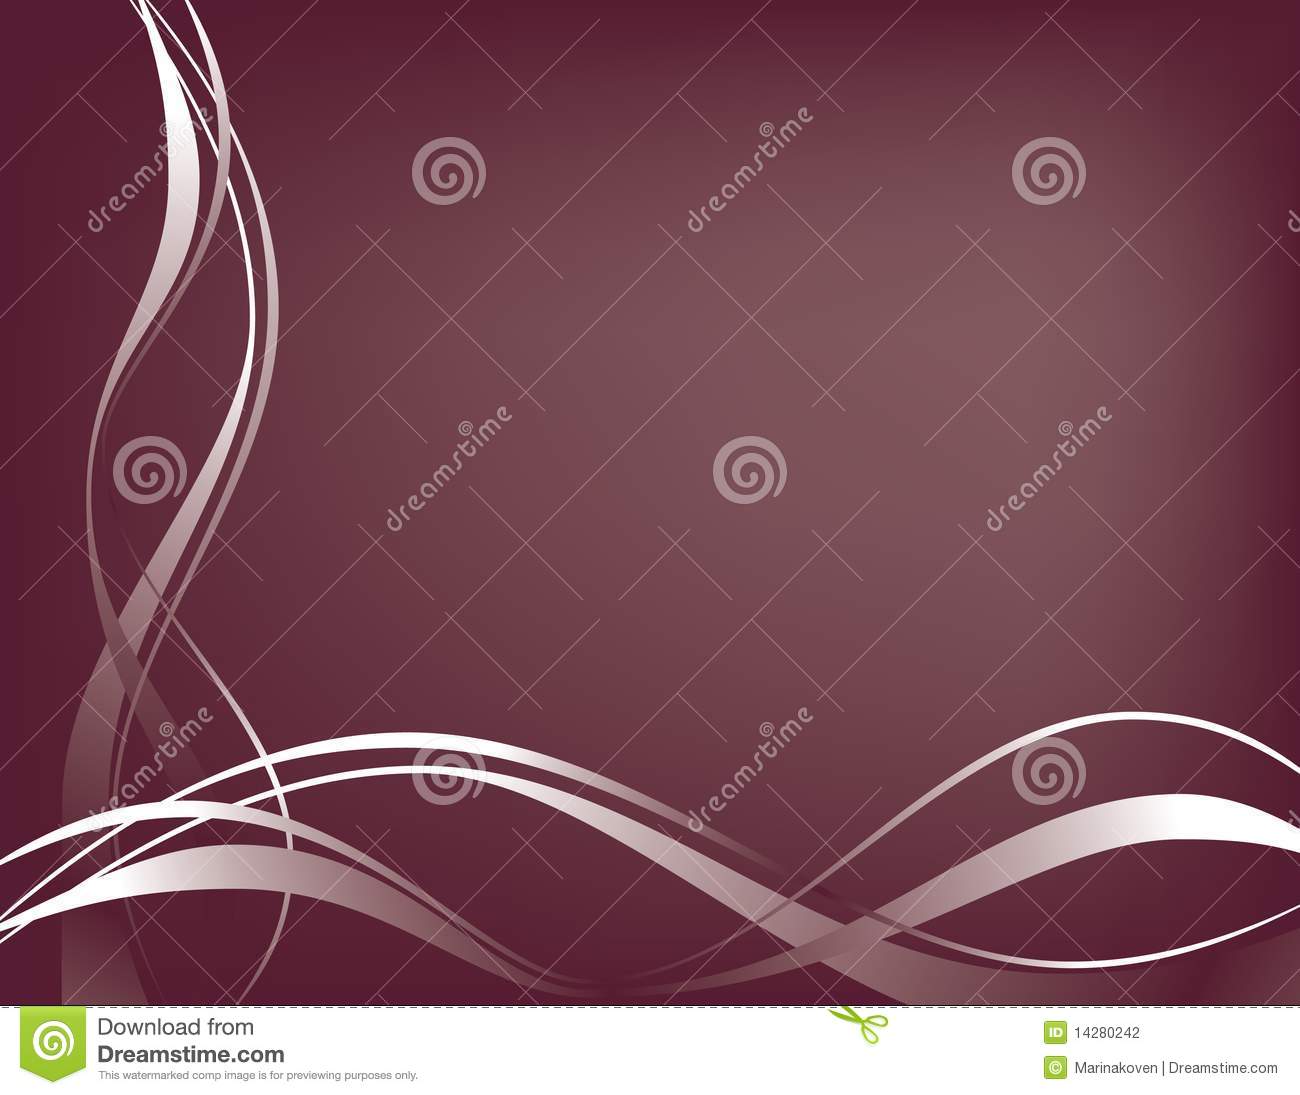 Burgundy Abstract Background Stock Photography   Image  14280242